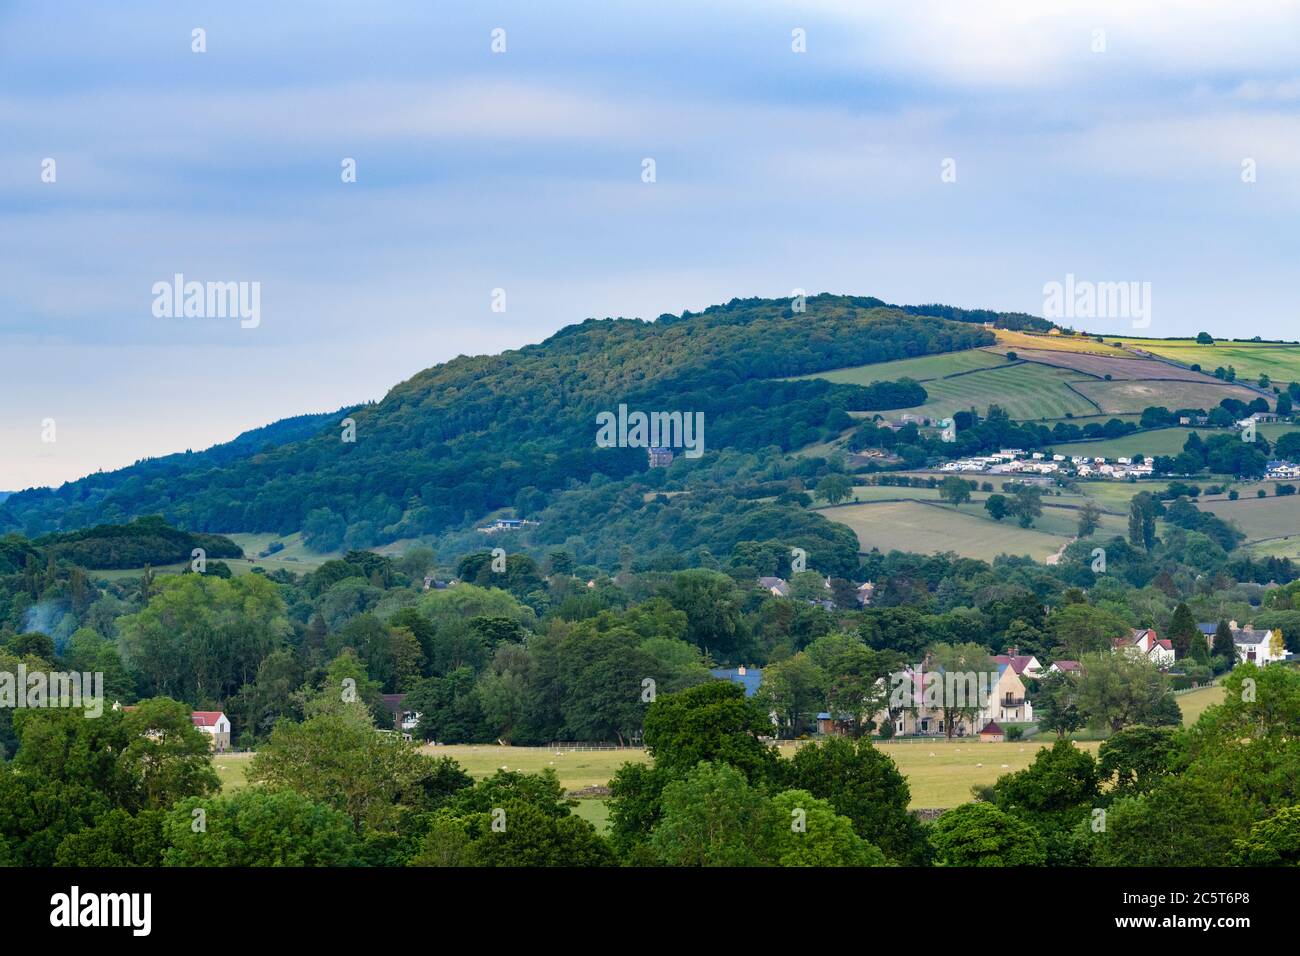 High prominent landmark ridge or escarpment, woodland trees on hillside & houses in scenic valley - view to Chevin Forest Park, Wharfedale, England UK Stock Photo